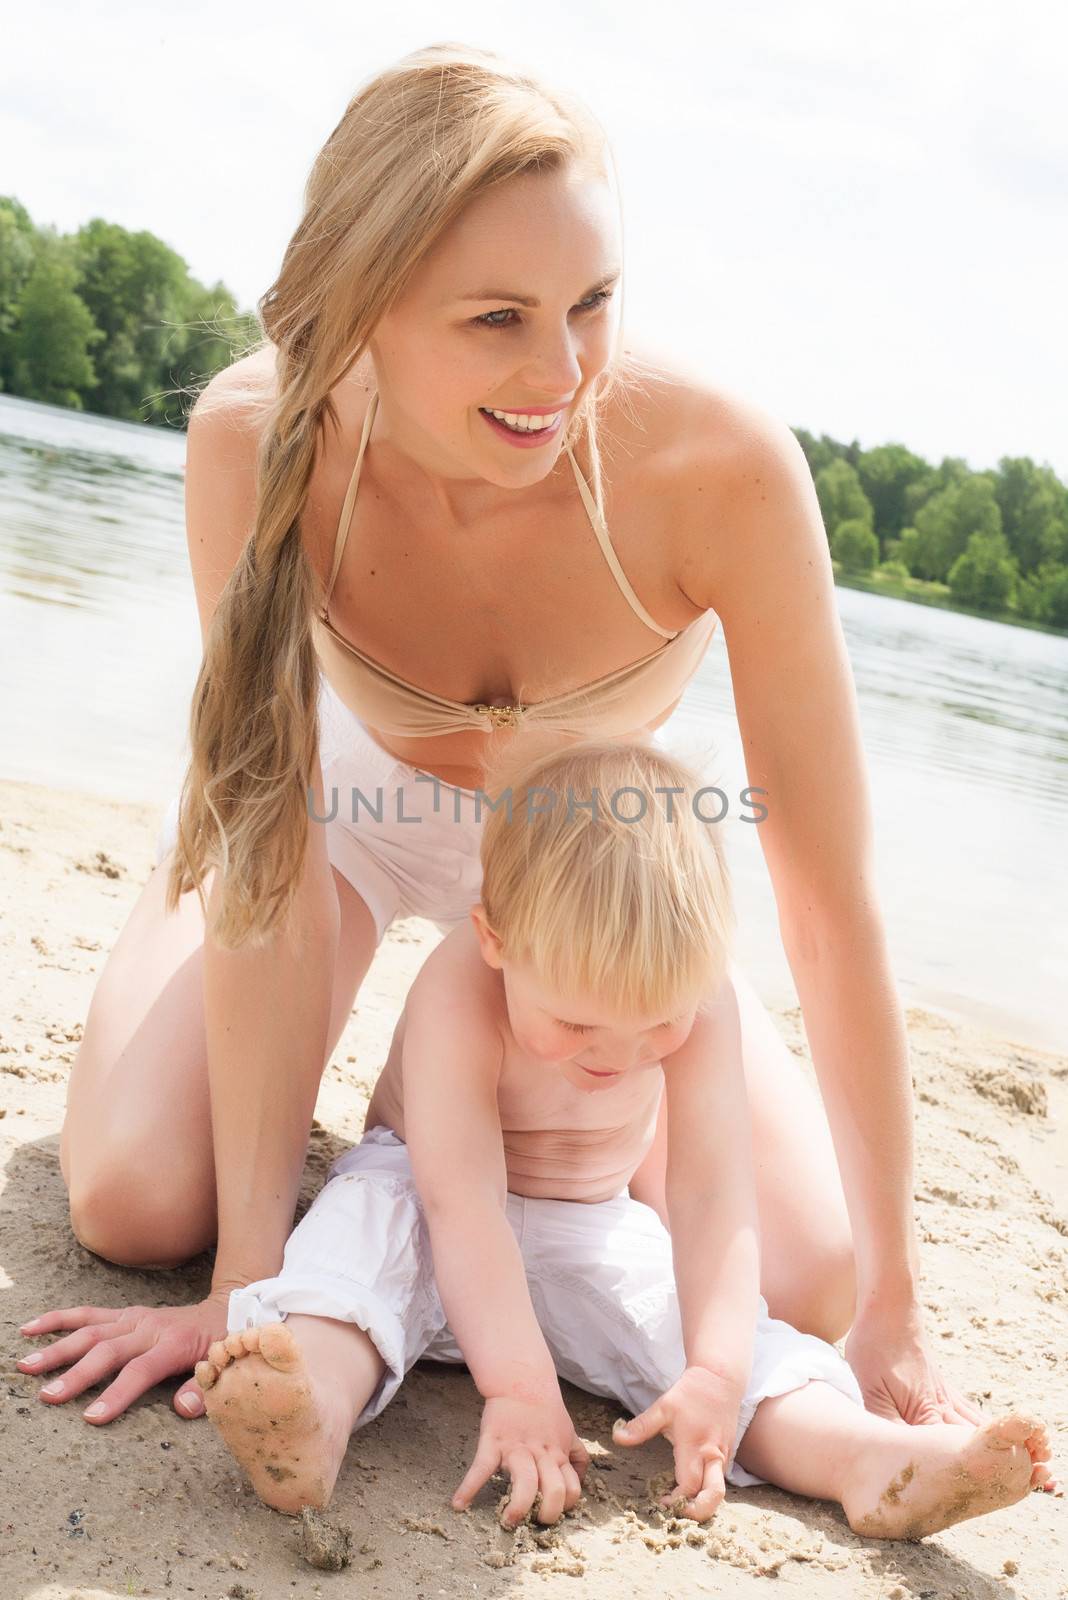 Happy mother and son having a nice day at the beach